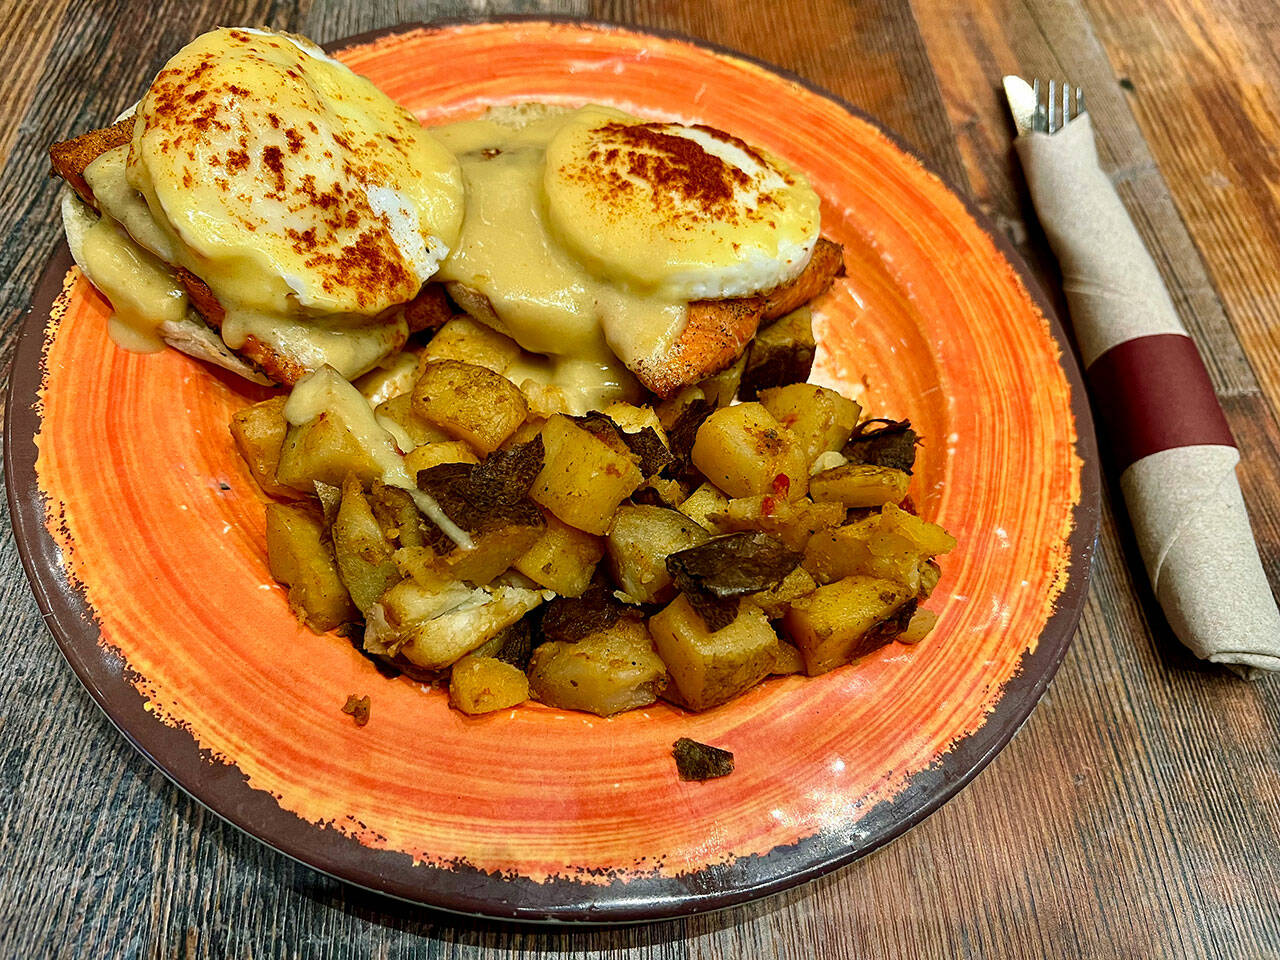 Salmon Eggs Benedict with a side of skillet potatoes, $16, at Quil Ceda Creek Casino in Tulalip, where breakfast with numerous menu choices is served 24/7. (Andrea Brown / The Herald)